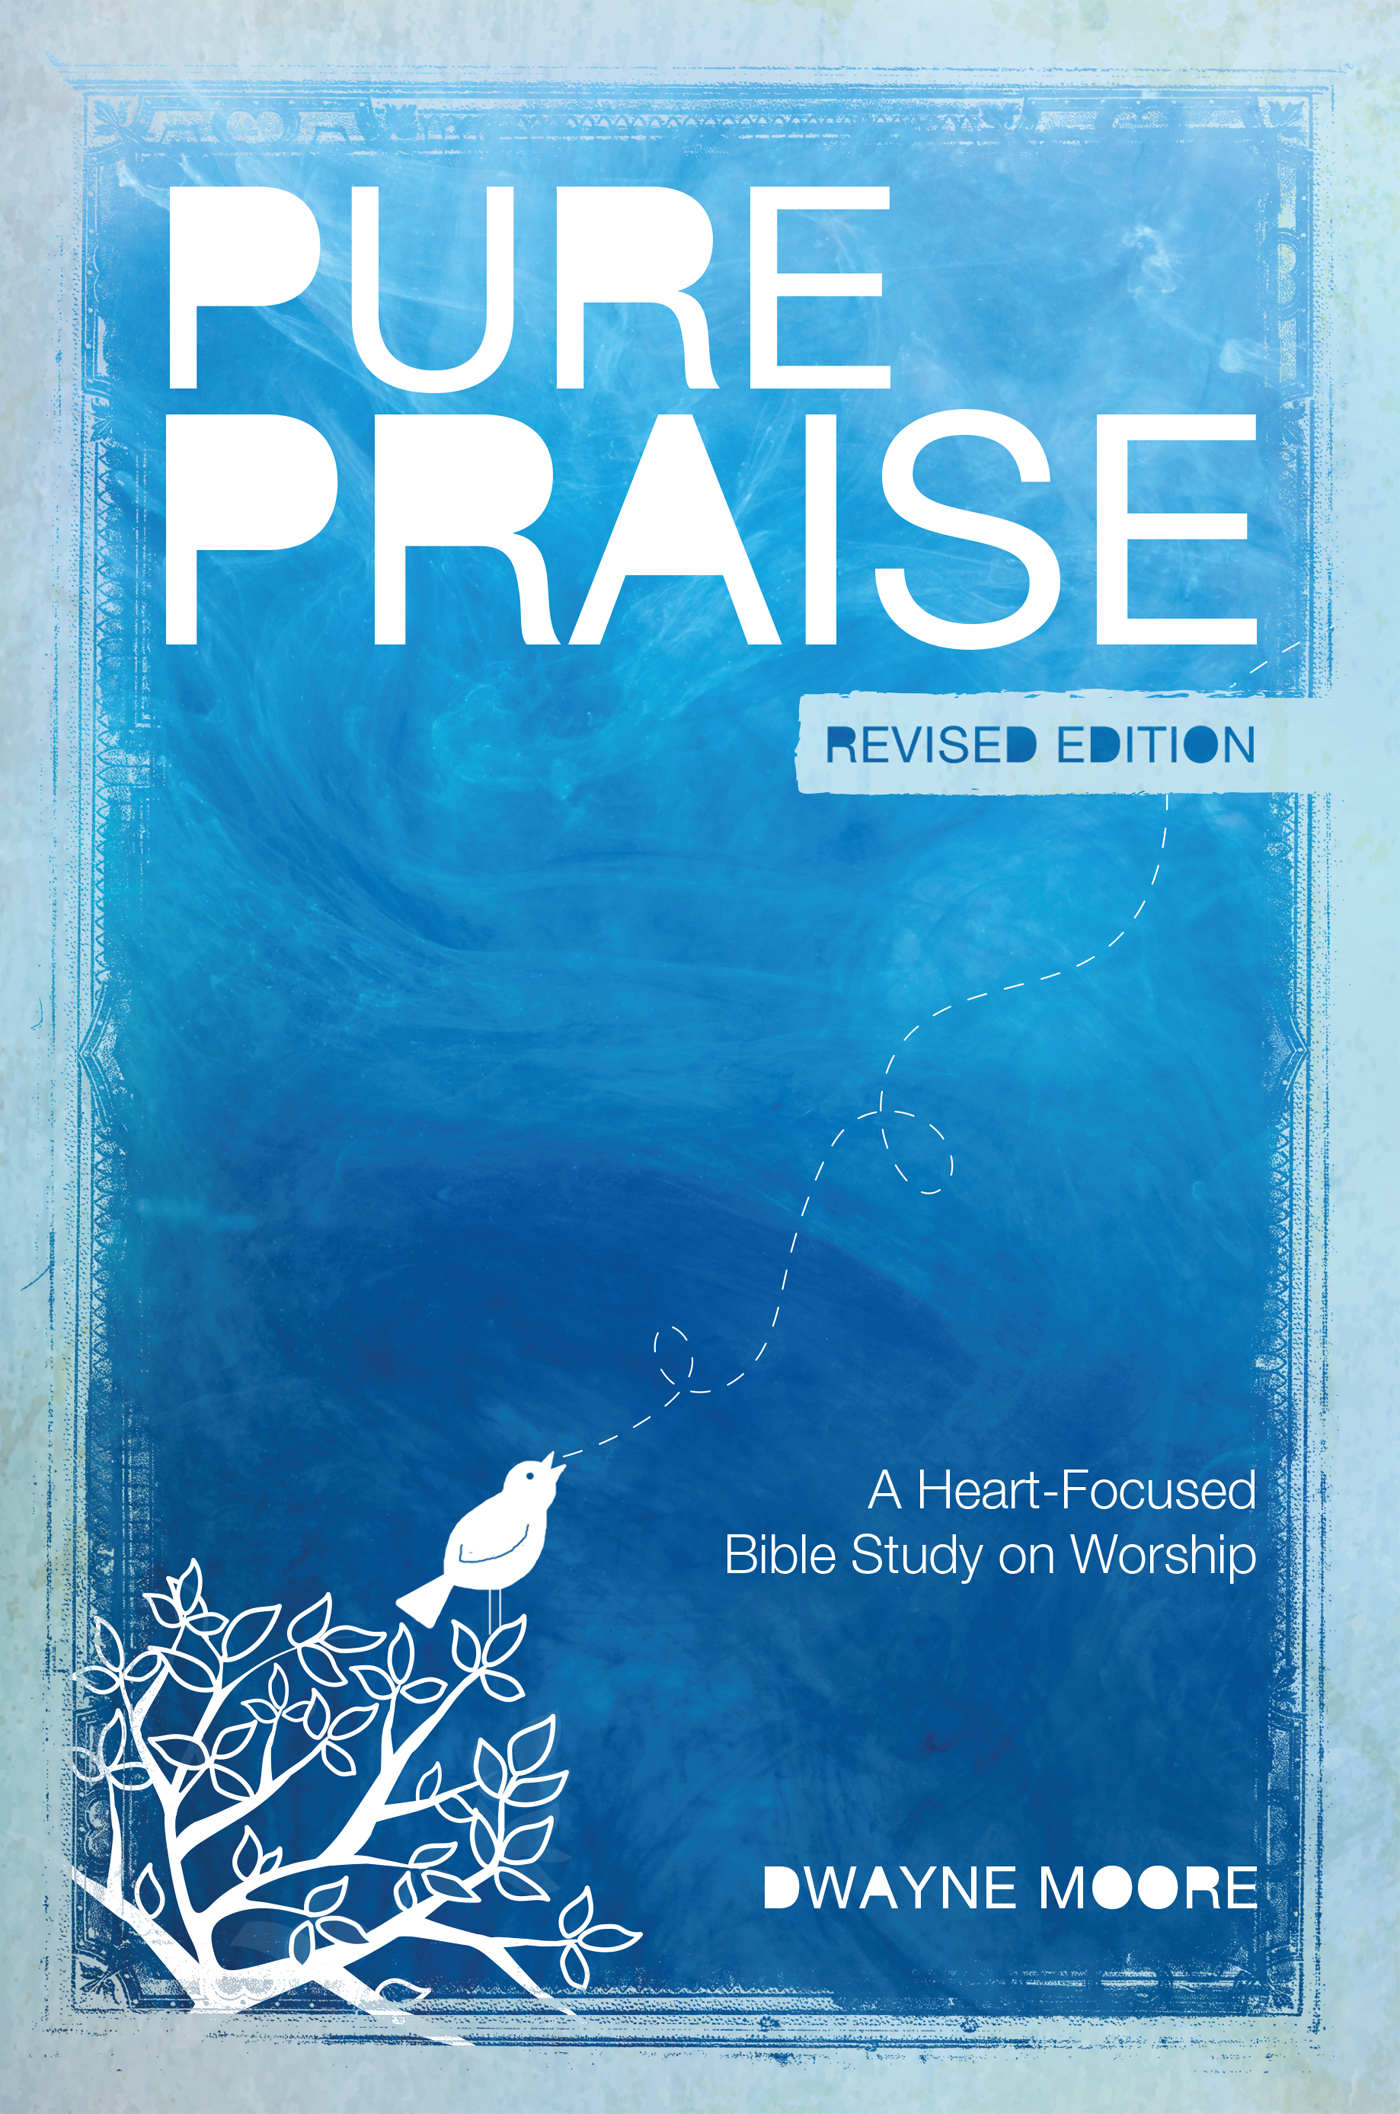 What Others Are Saying About Pure Praise This revised edition of Pure Praise - photo 1